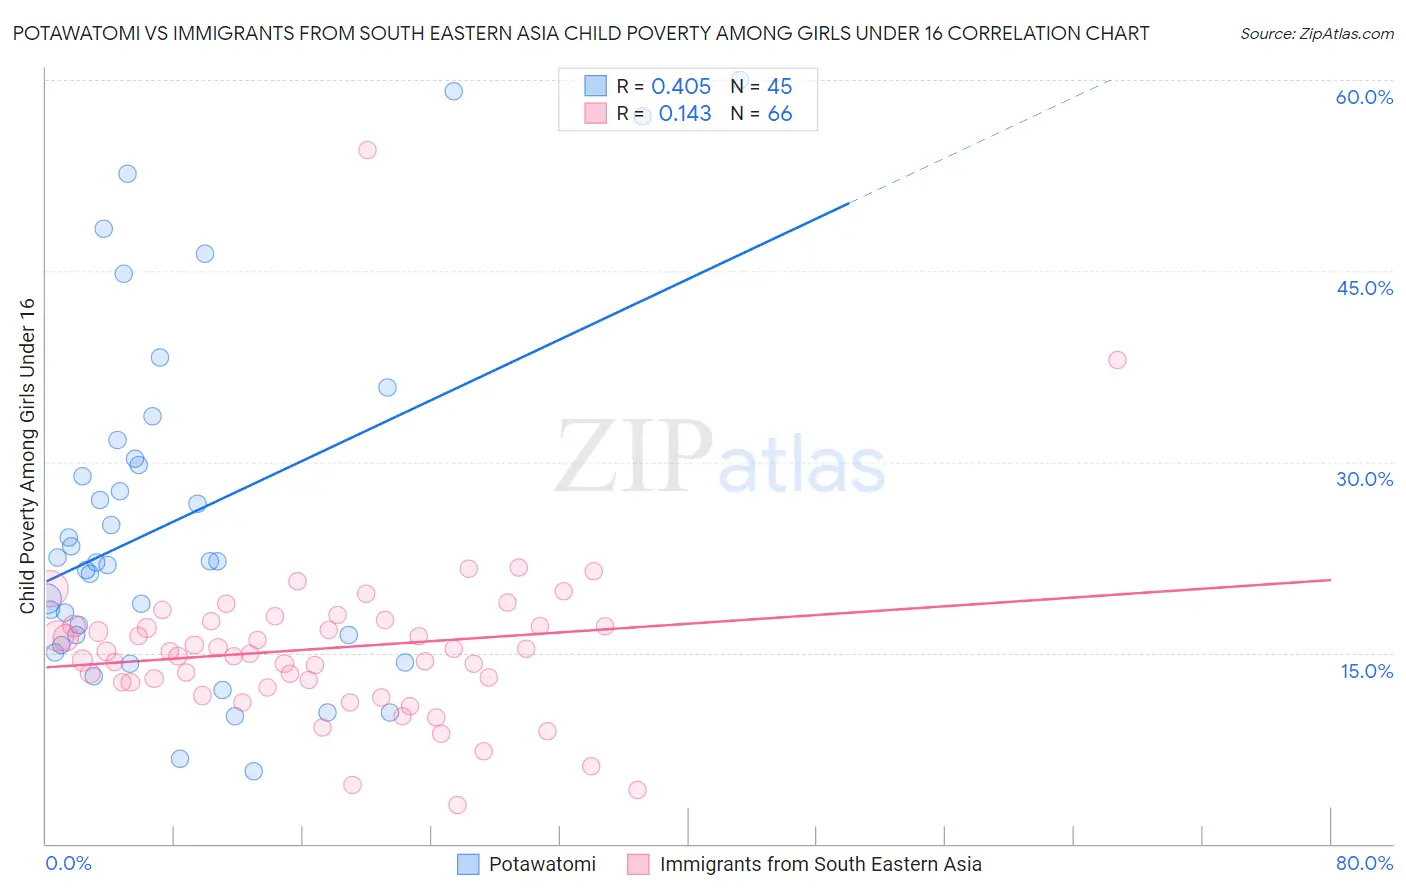 Potawatomi vs Immigrants from South Eastern Asia Child Poverty Among Girls Under 16